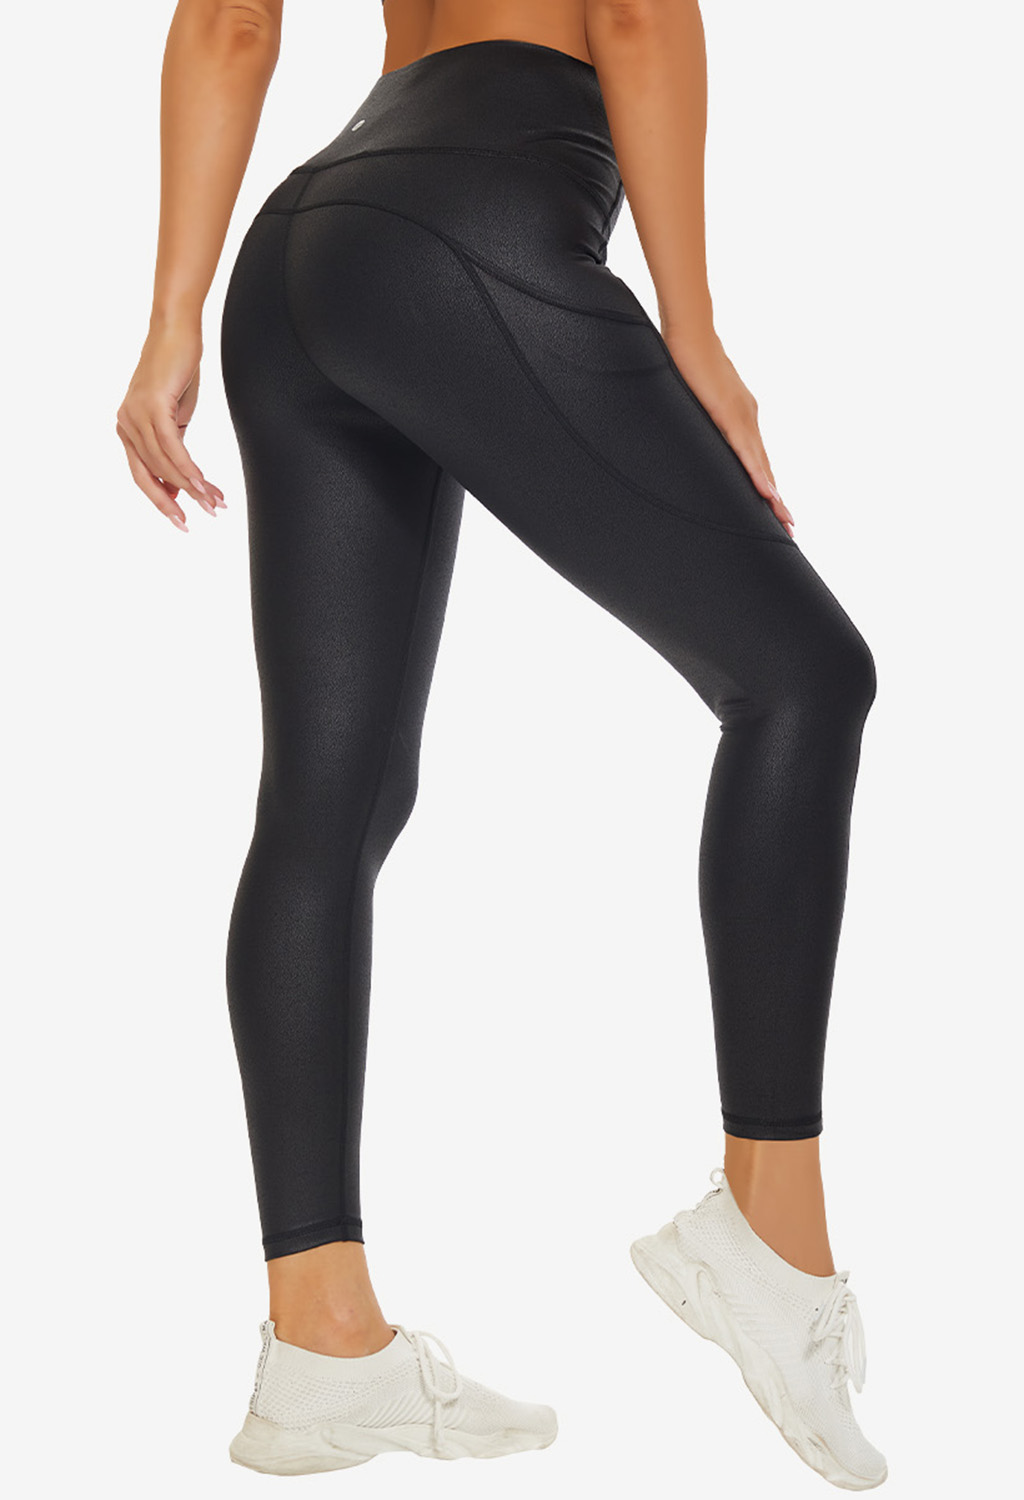 KYRIAD Matte Faux Leather Workout Leggings for Women Tummy Control